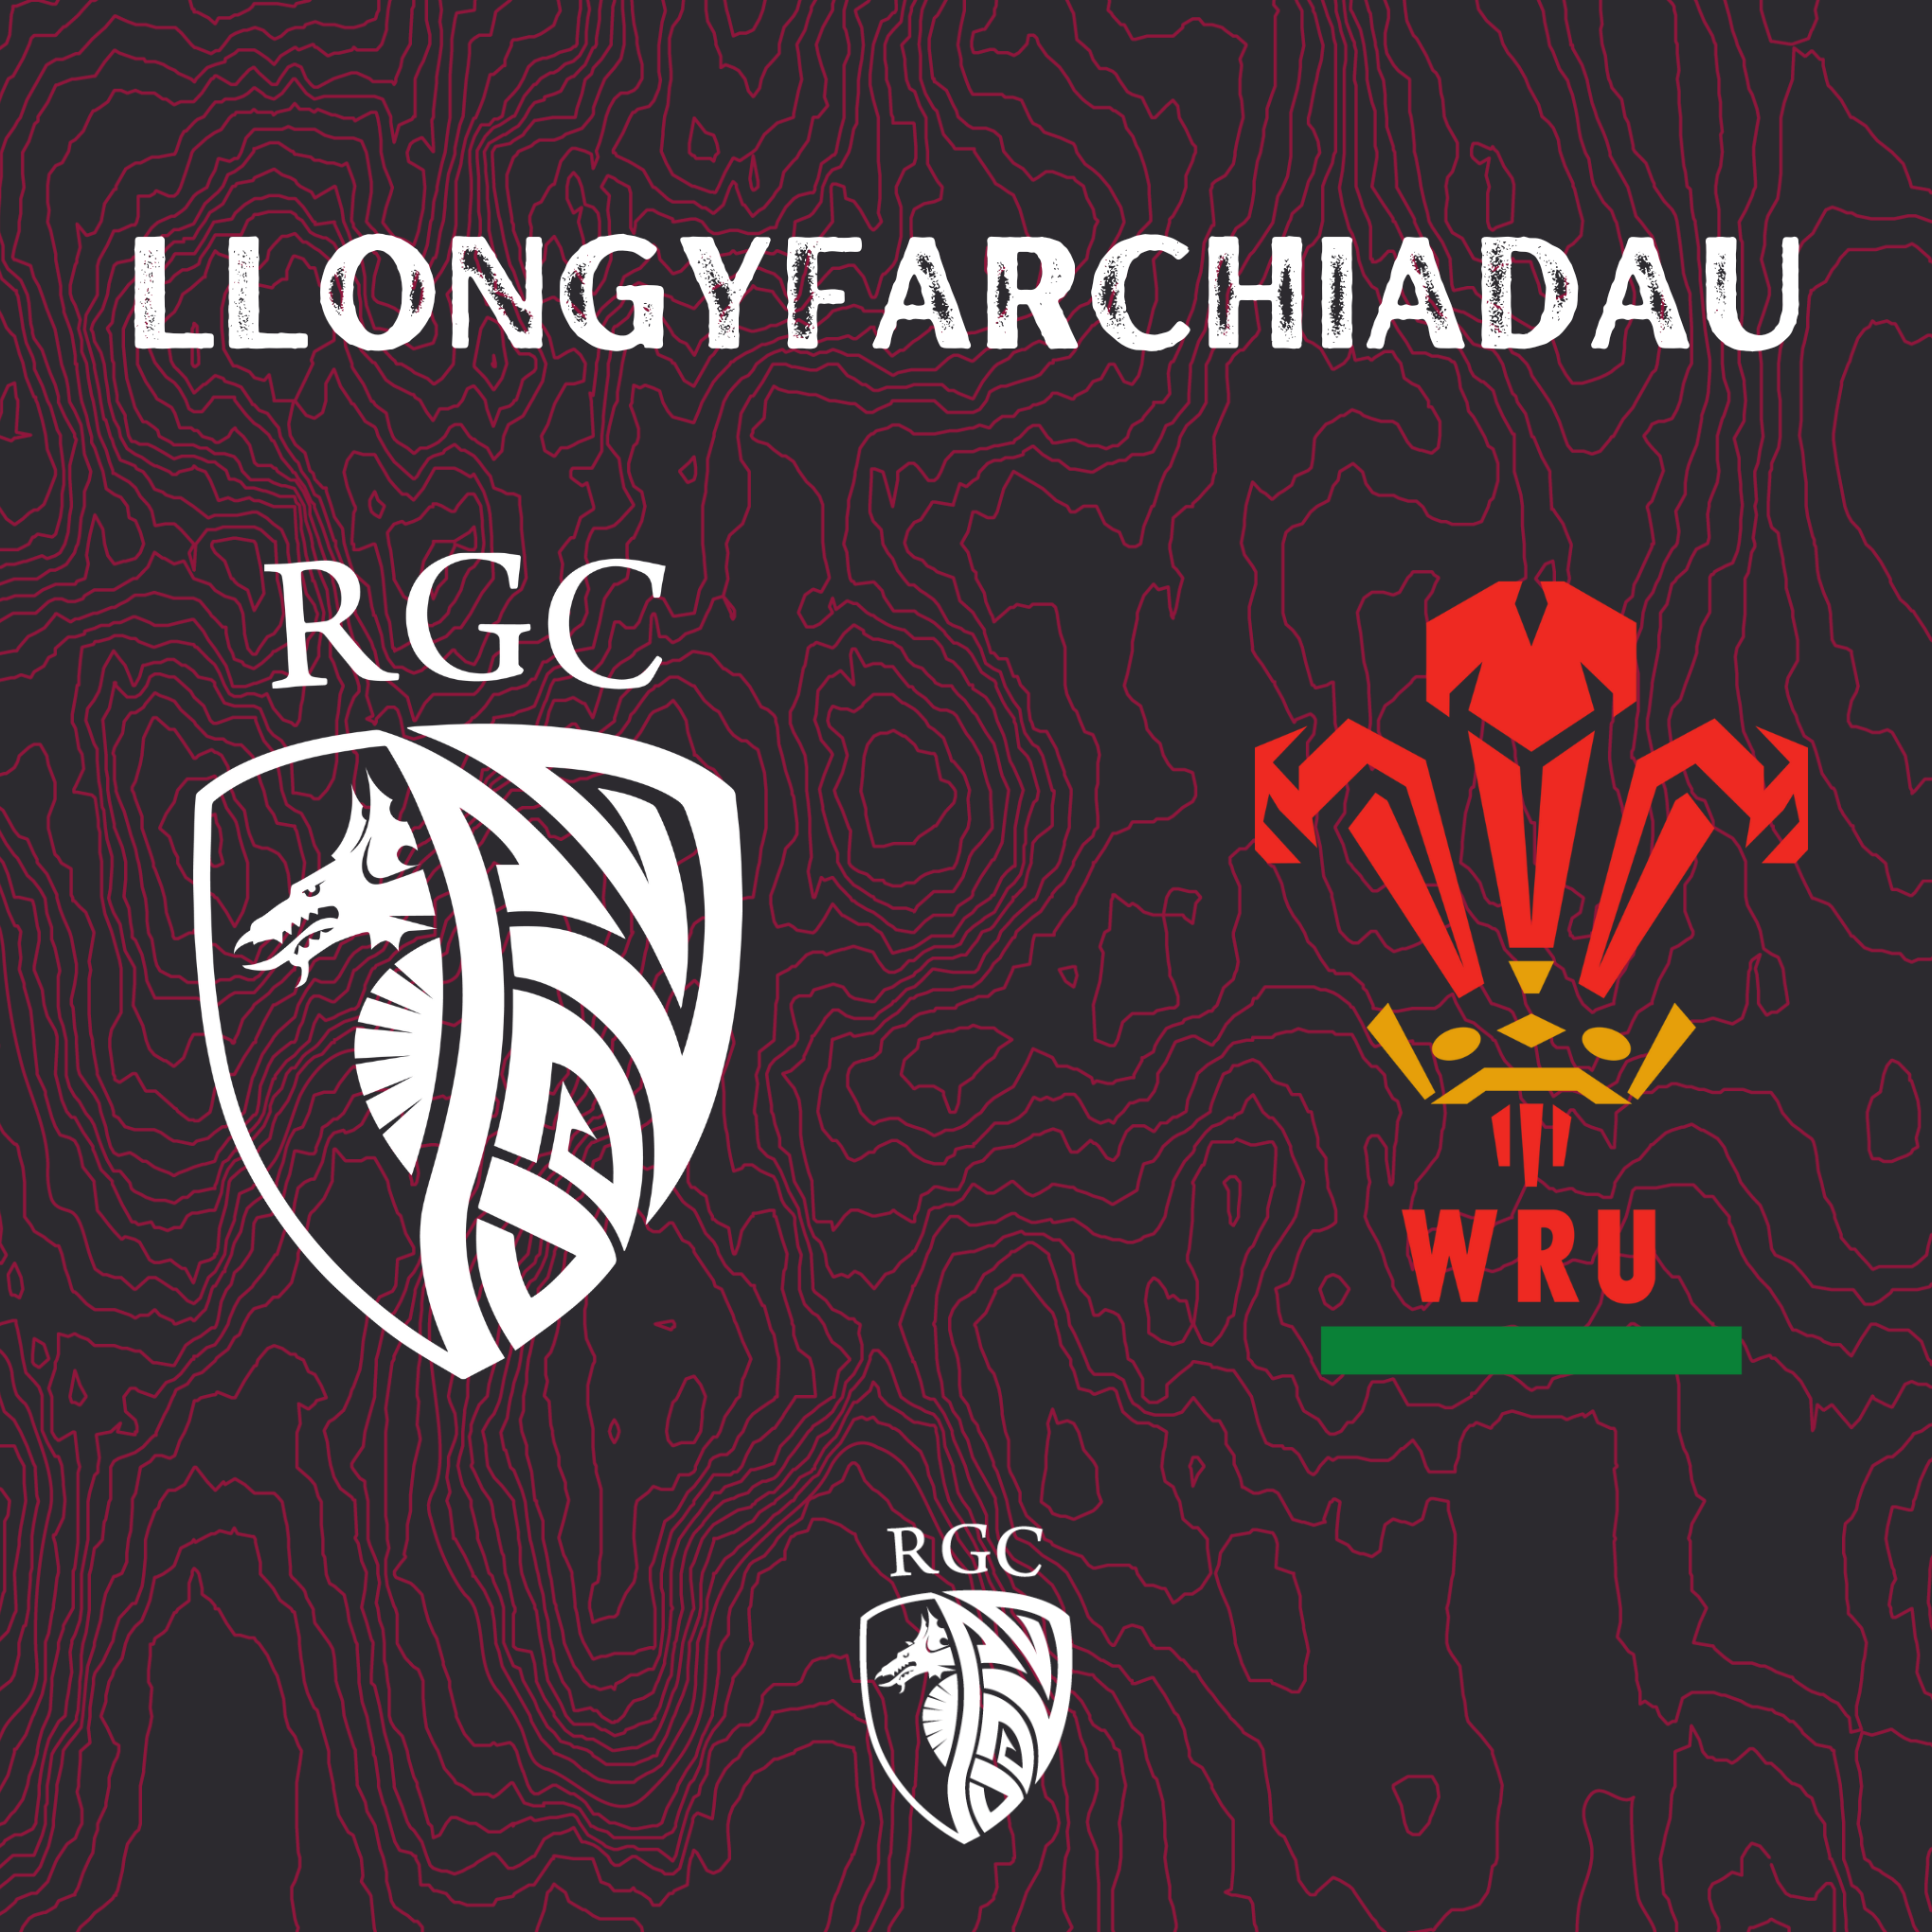 17 Players Selected for Wales Age Grade